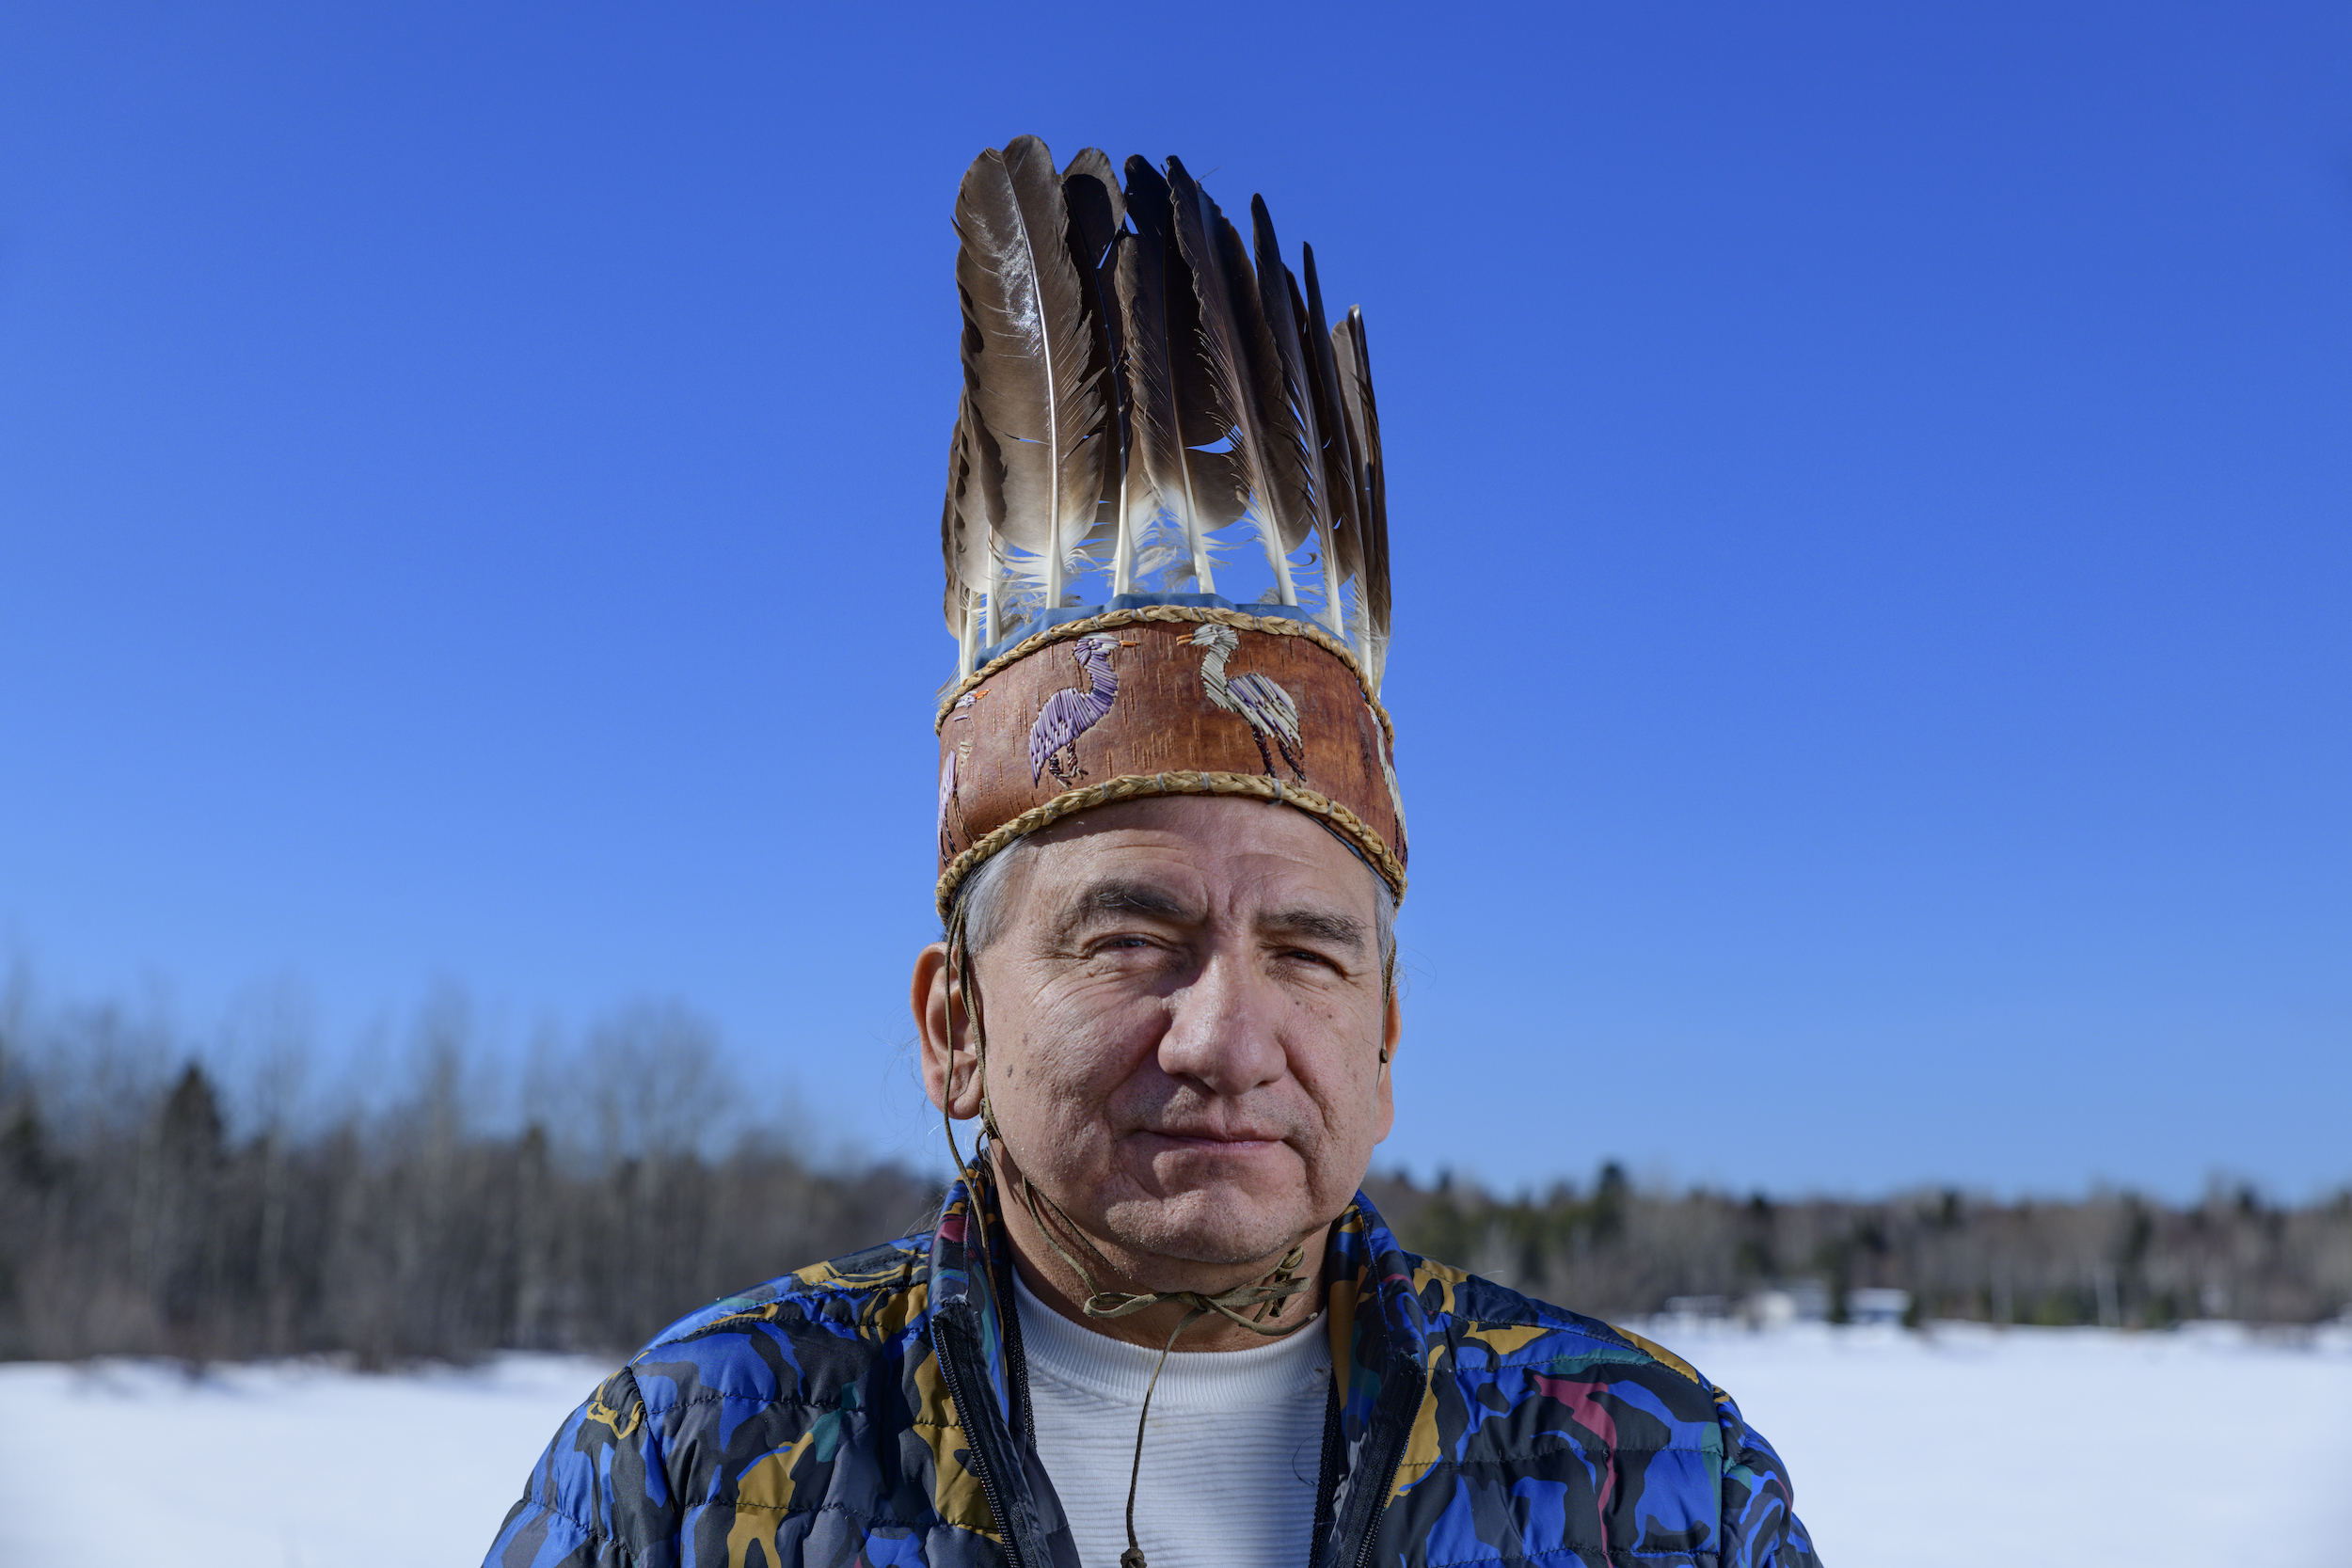 Chief Dean Sayers of Batchewana First Nation has been involved in the Robinson Huron Treaty litigation since the trust of 21 nations was founded in 2010. The historical and spiritual significance of restoring the treaty relationship is not lost on him. His ancestor, Chief Nebenaigoching of Batchewana, signed the treaty himself. Photo: Jeff Dixon / The Narwhal